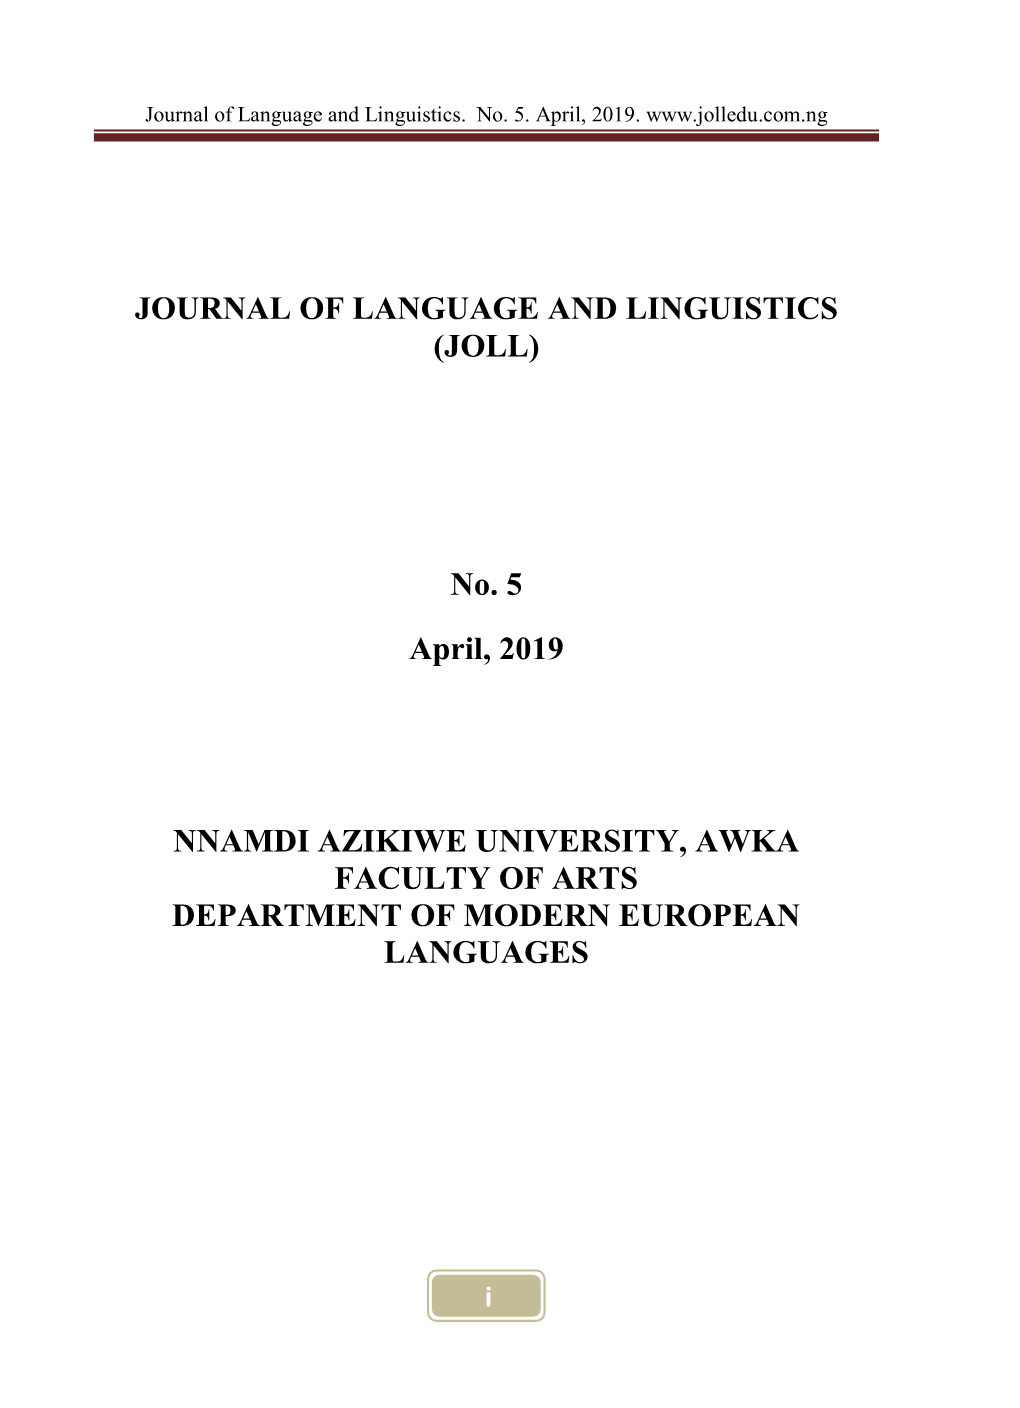 JOURNAL of LANGUAGE and LINGUISTICS (JOLL) No. 5 April, 2019 NNAMDI AZIKIWE UNIVERSITY, AWKA FACULTY of ARTS DEPARTMENT of MODER